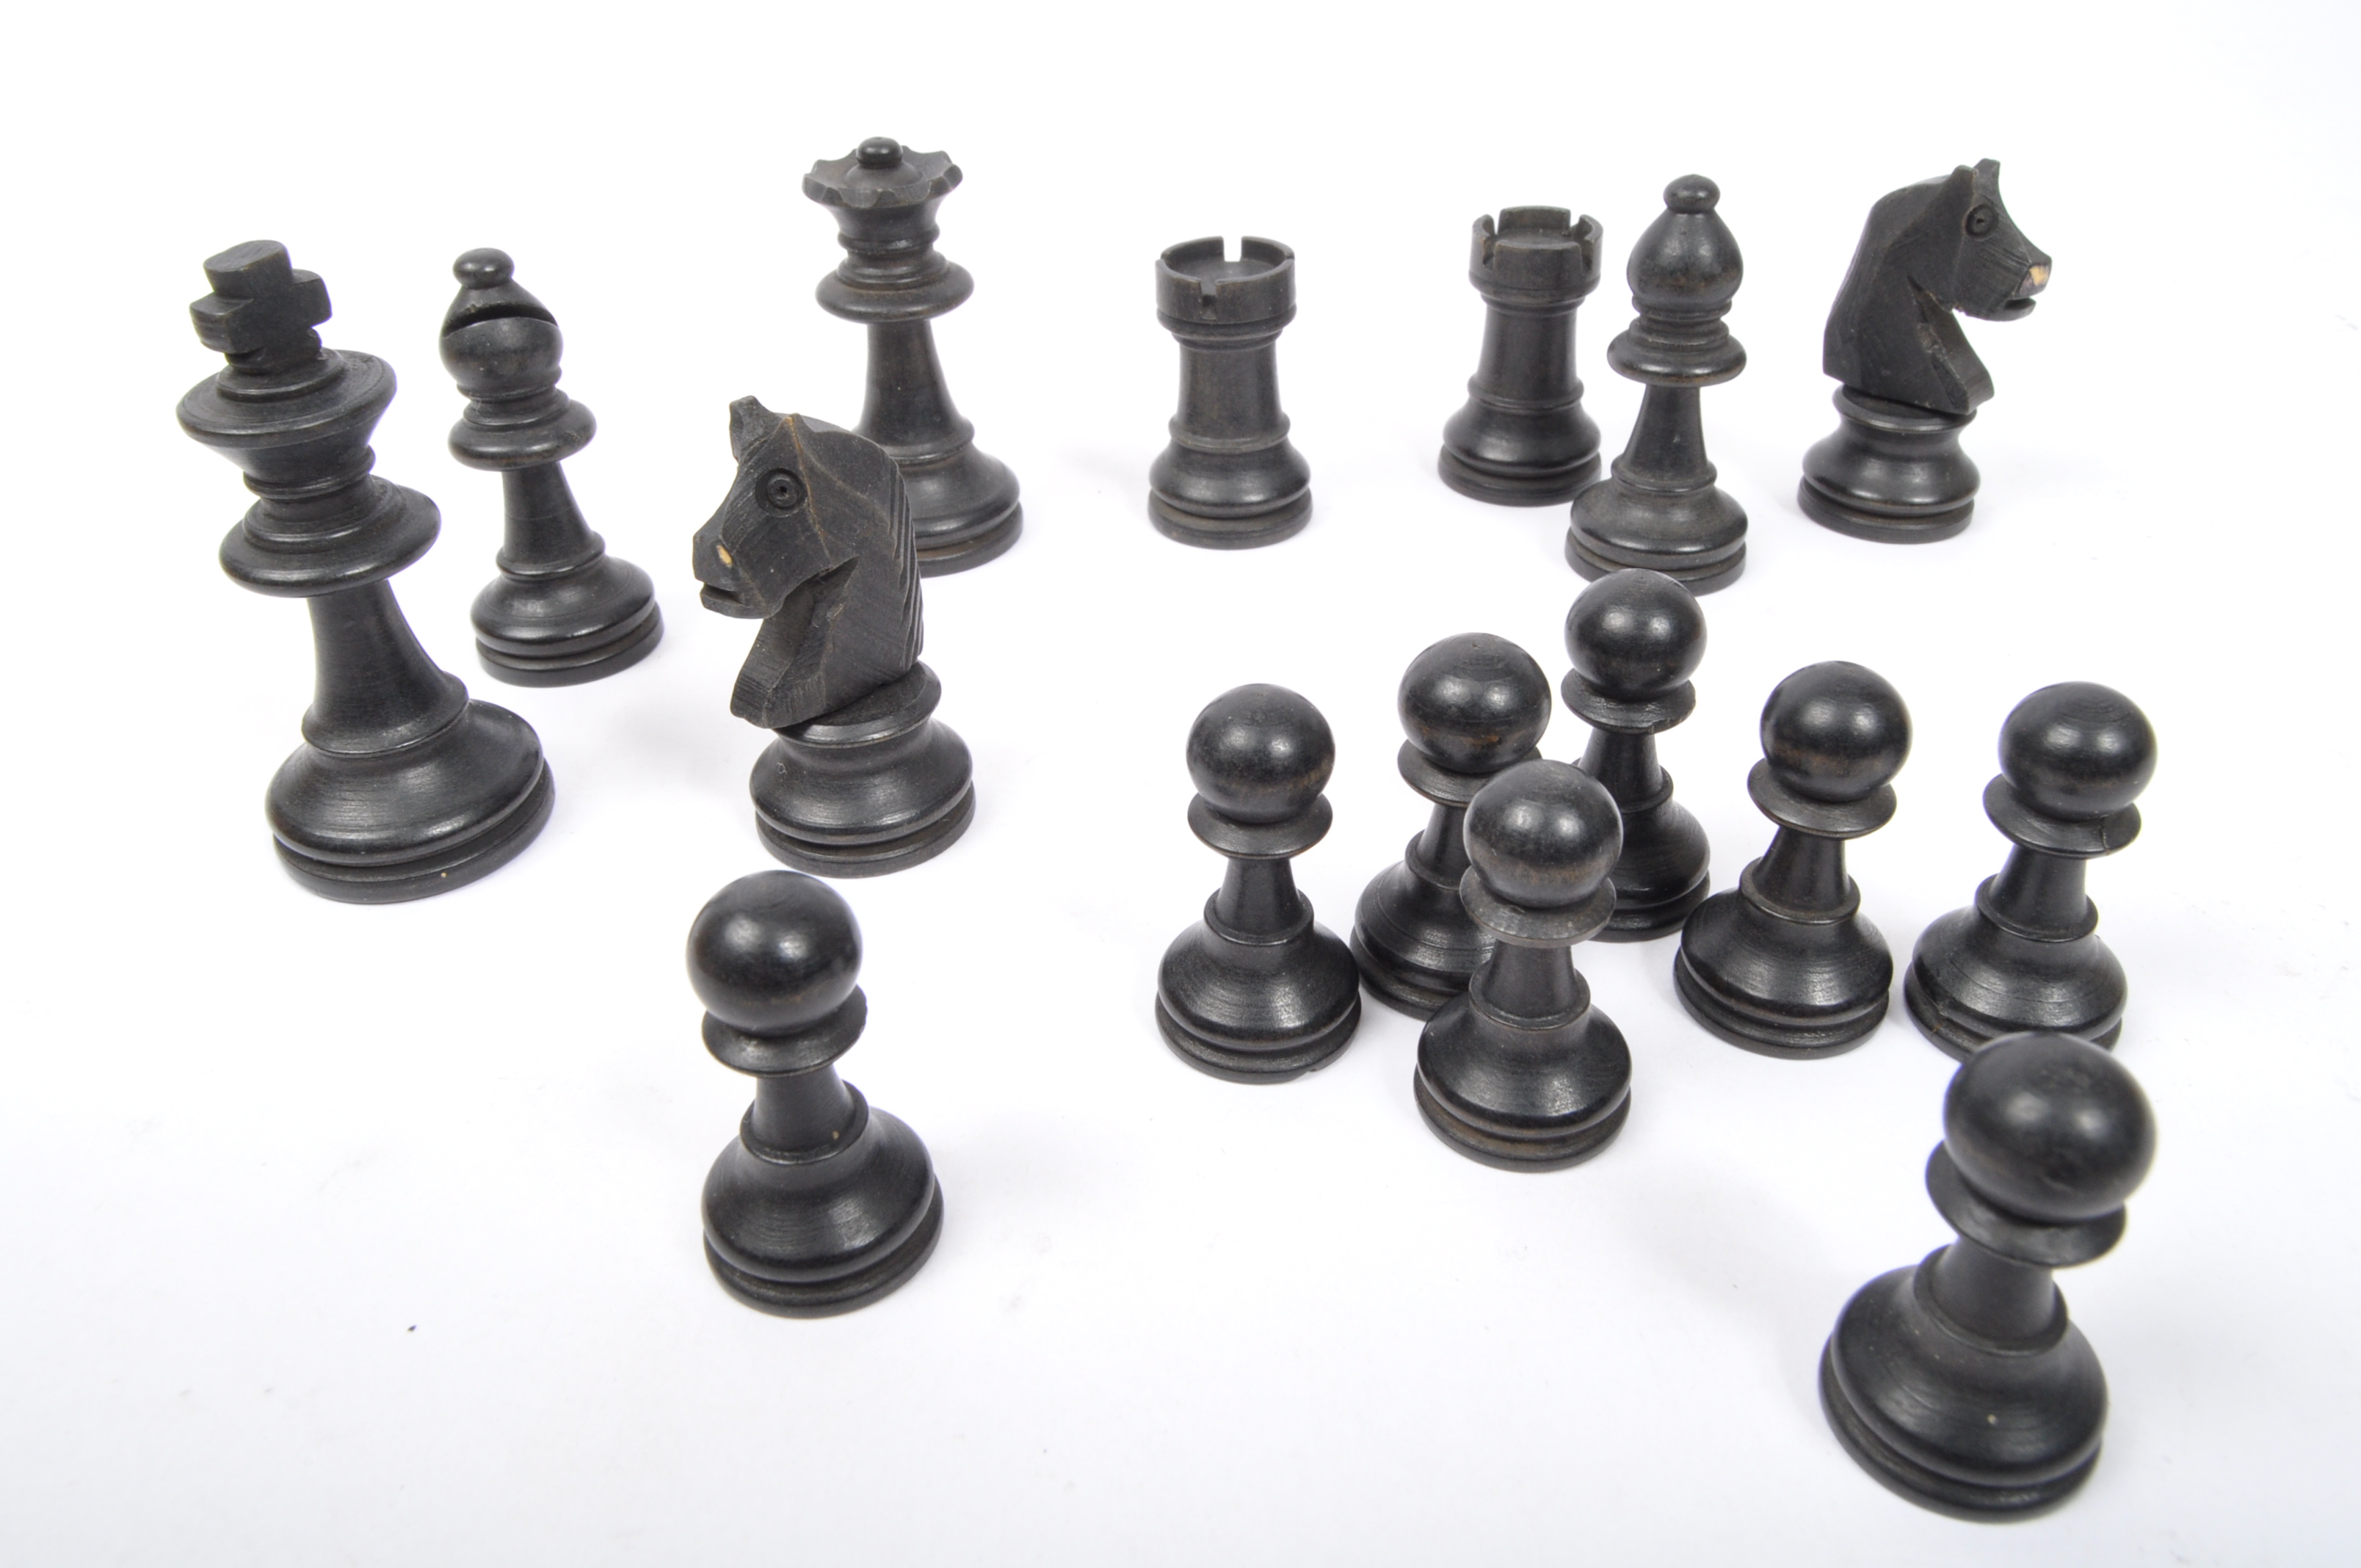 VINTAGE 20TH CENTURY TURNED WOOD CHESS PIECES - Image 3 of 5